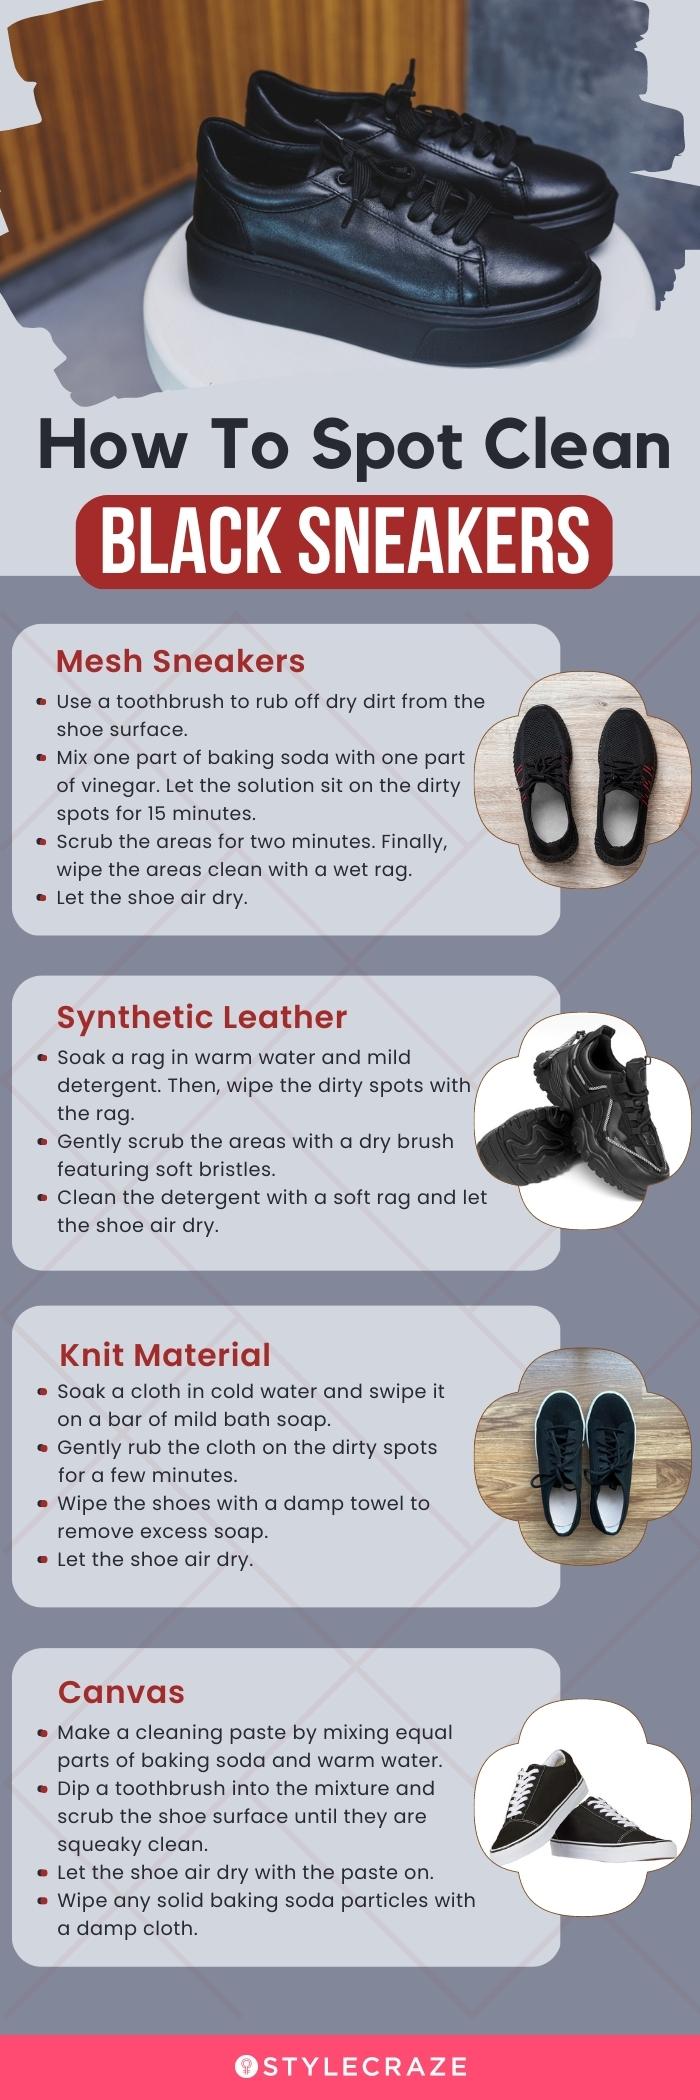 How To Spot Clean Black Sneakers (infographic)